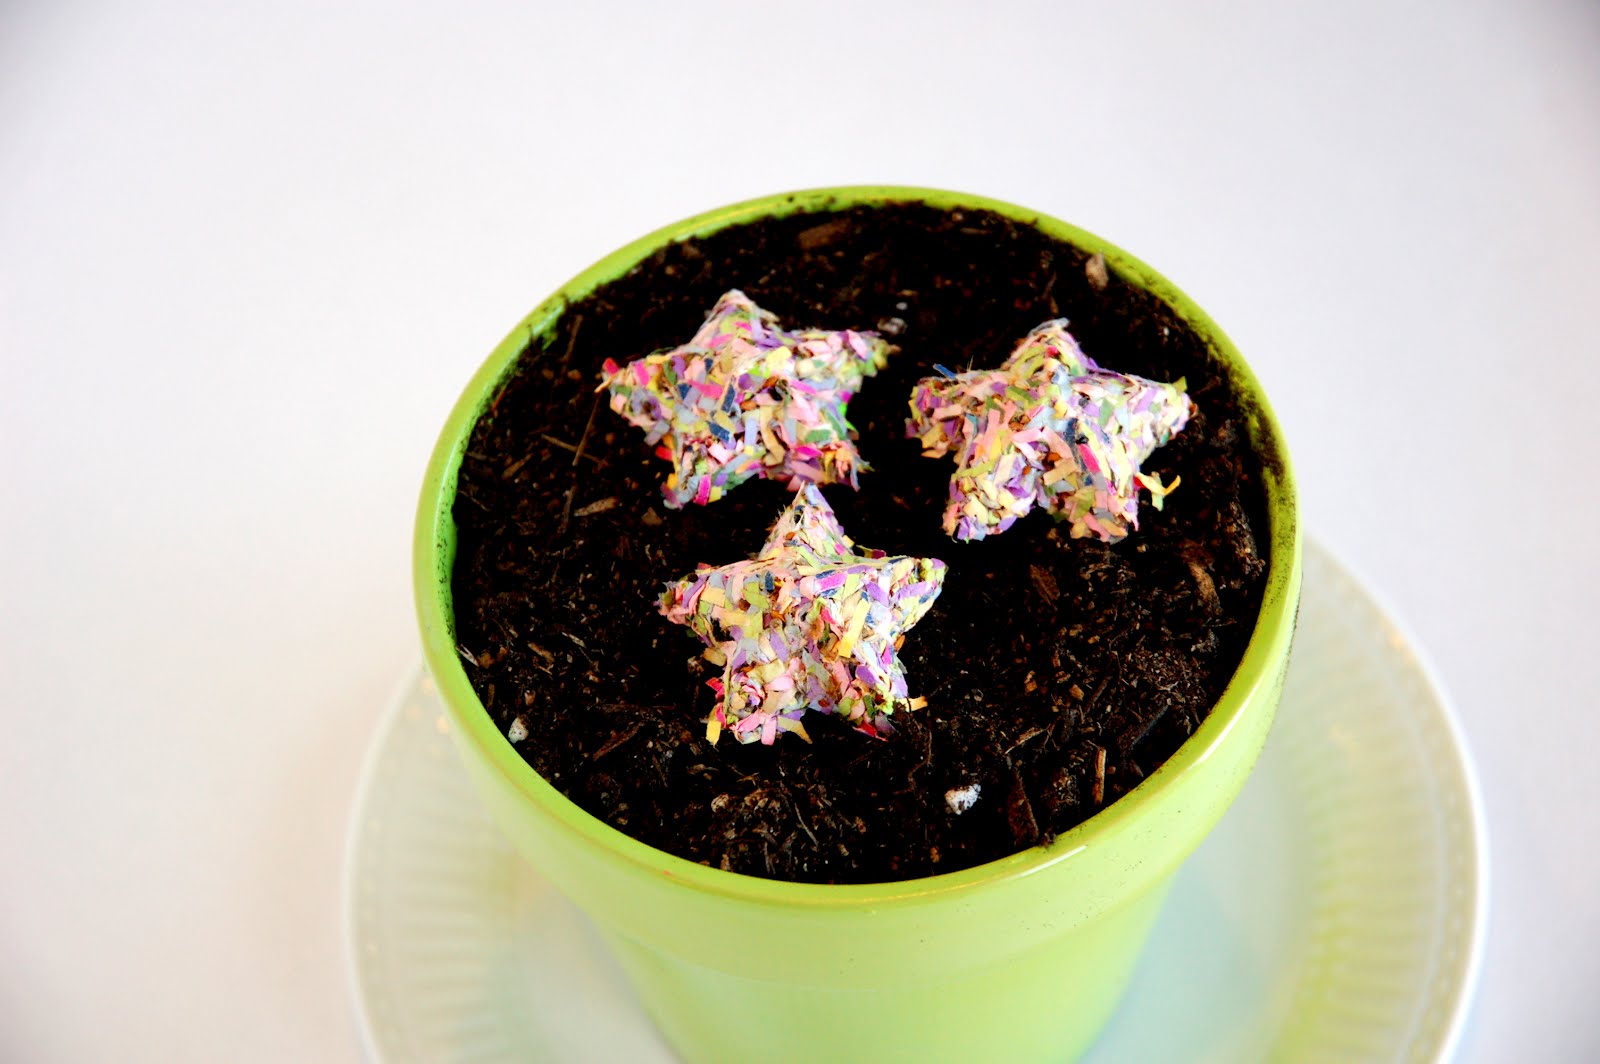 Star shaped paper confetti seed bombs